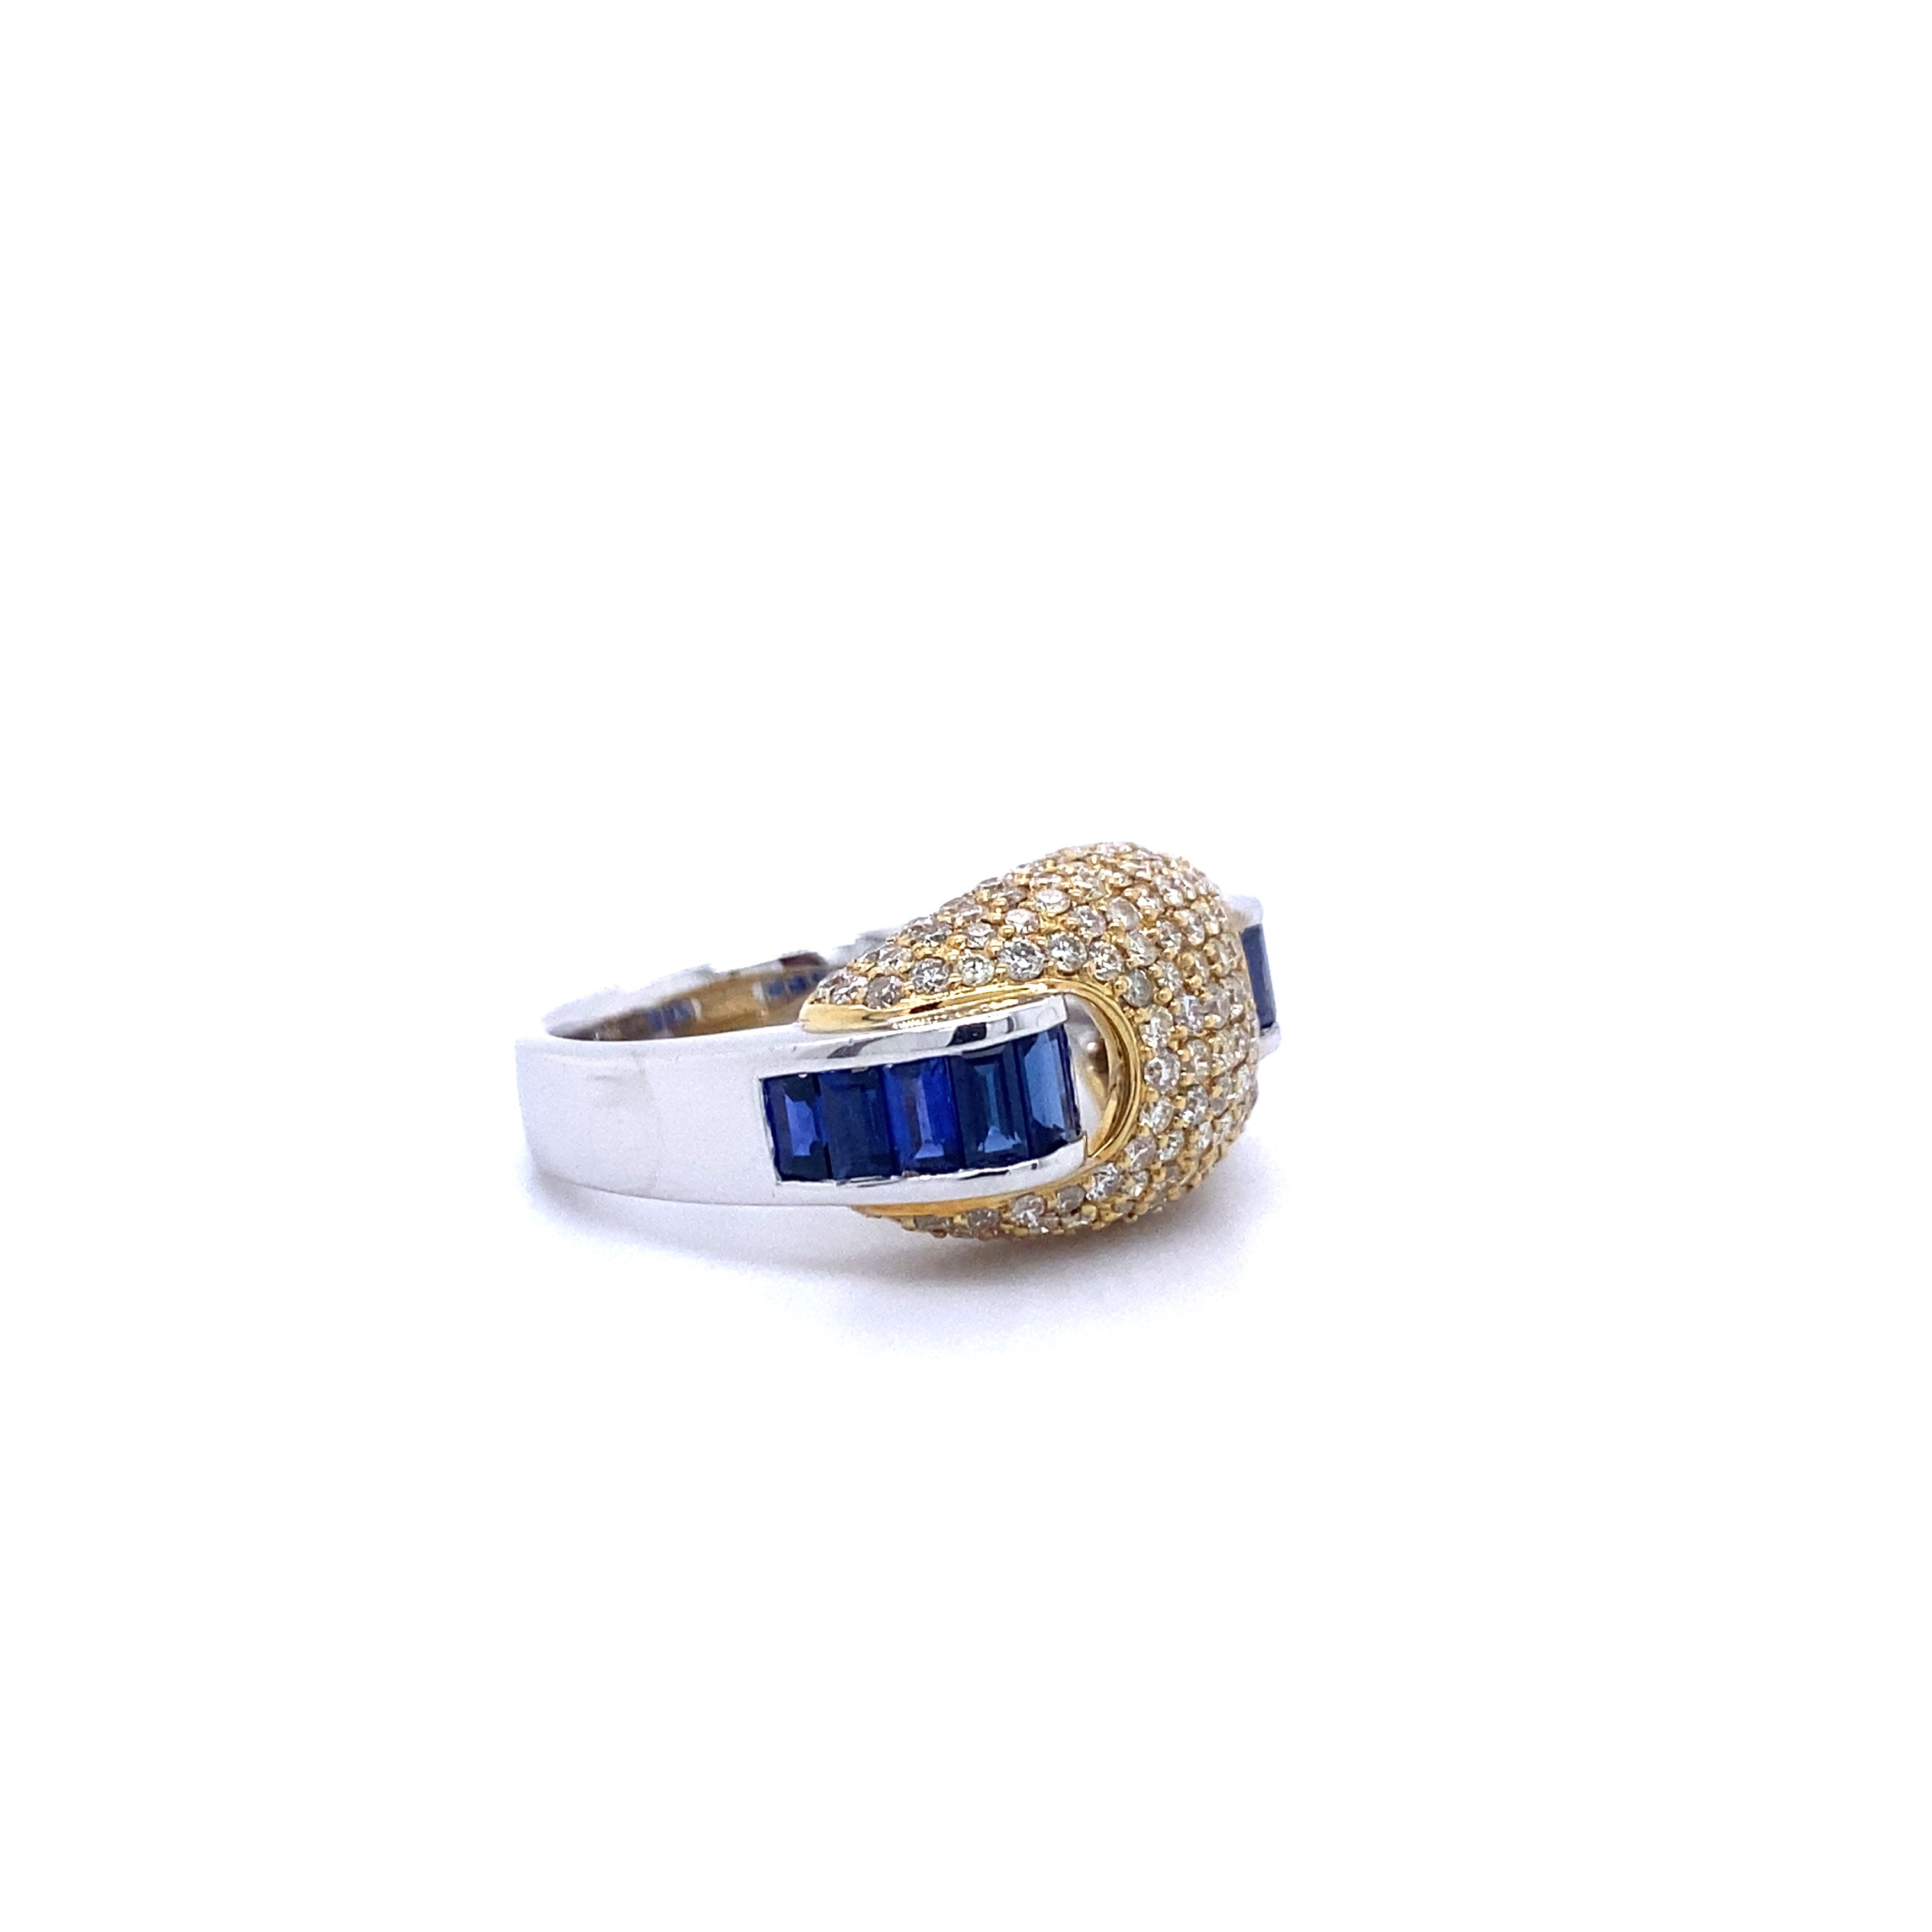 18ct yellow gold and white gold sapphire and diamond